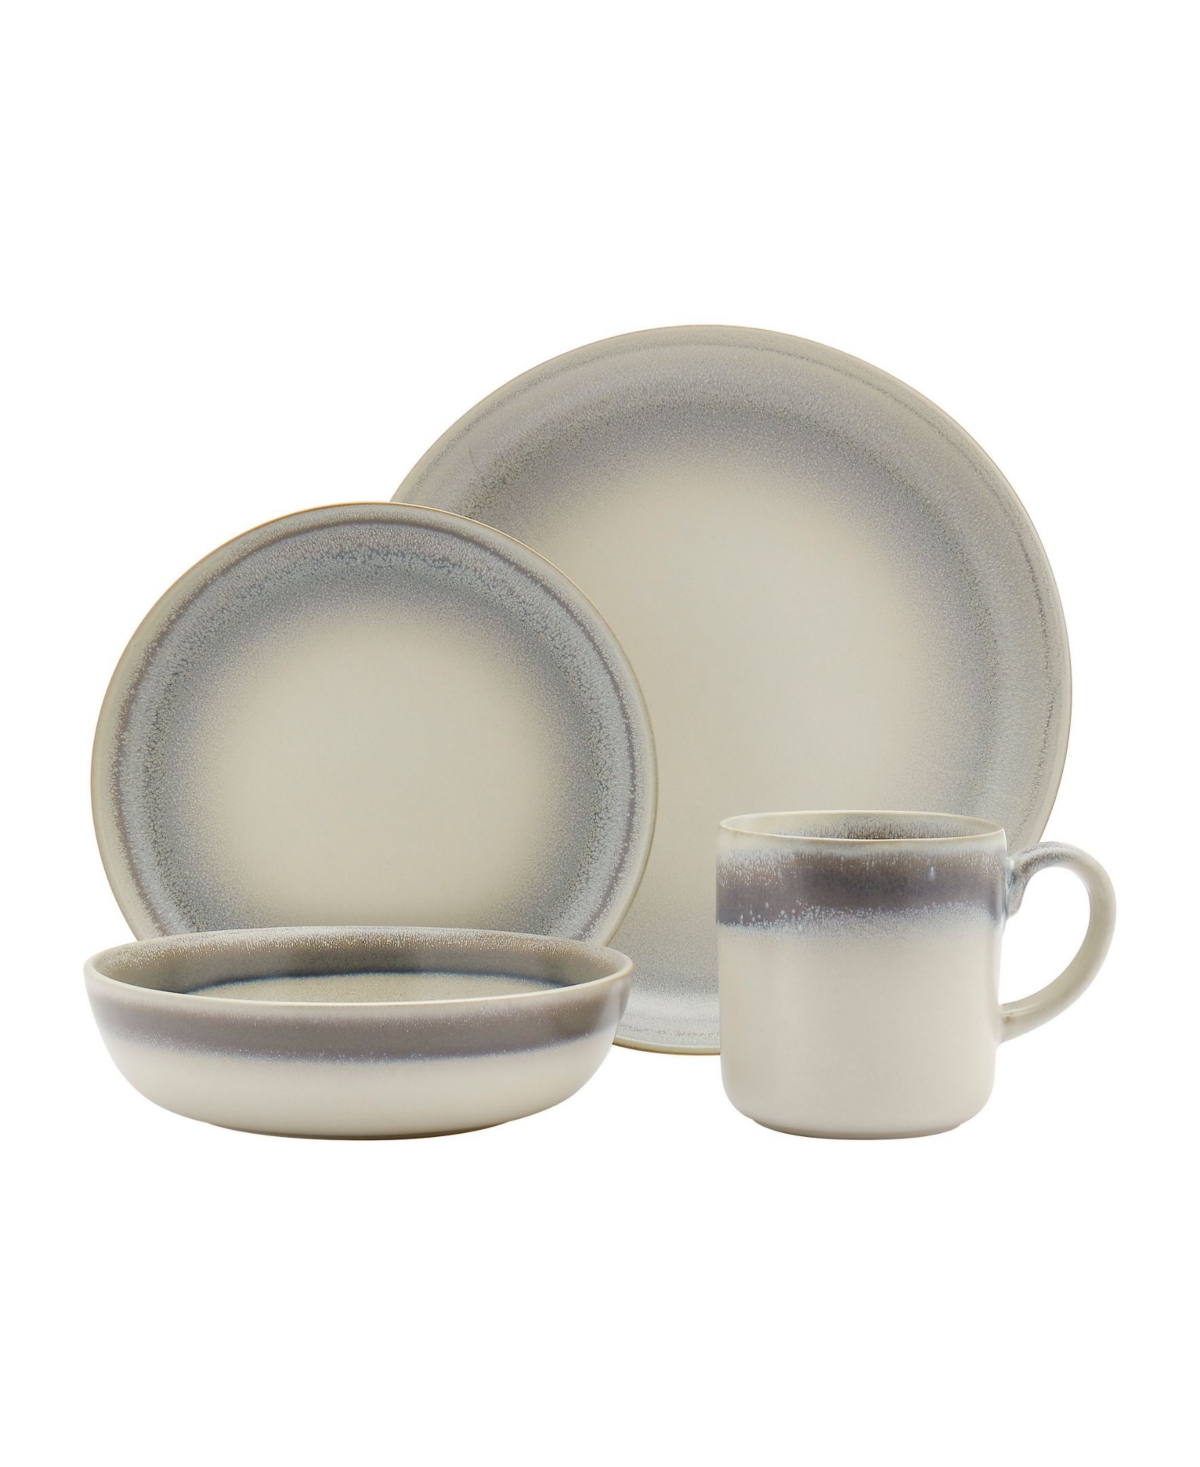 Tabletops Gallery Iridescent 16 Pc Dinnerware Set, Service for 4 - White